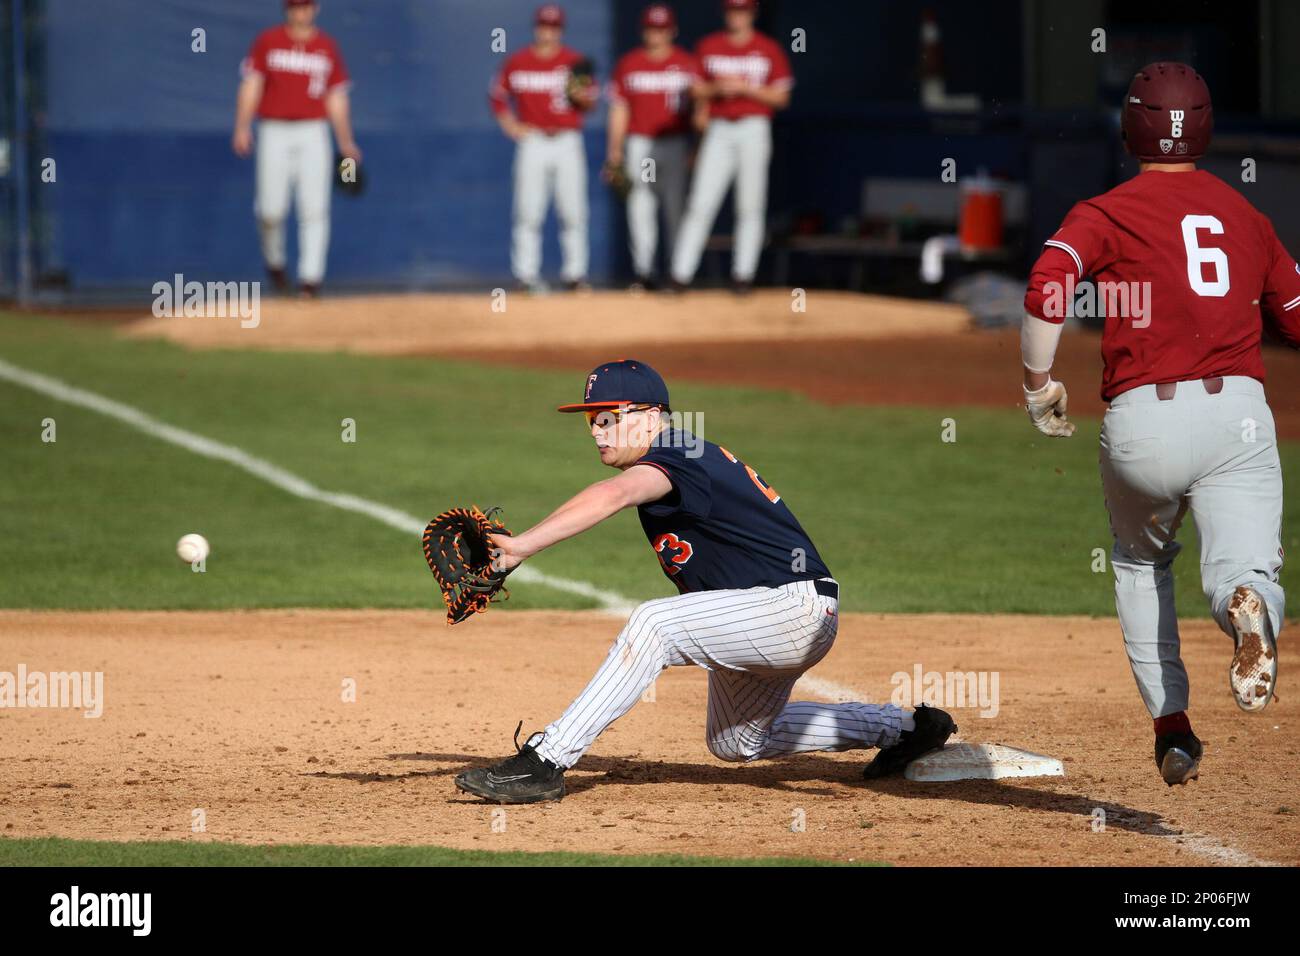 Jake Pavletich #23 of the Cal State Fullerton Titans takes a throw